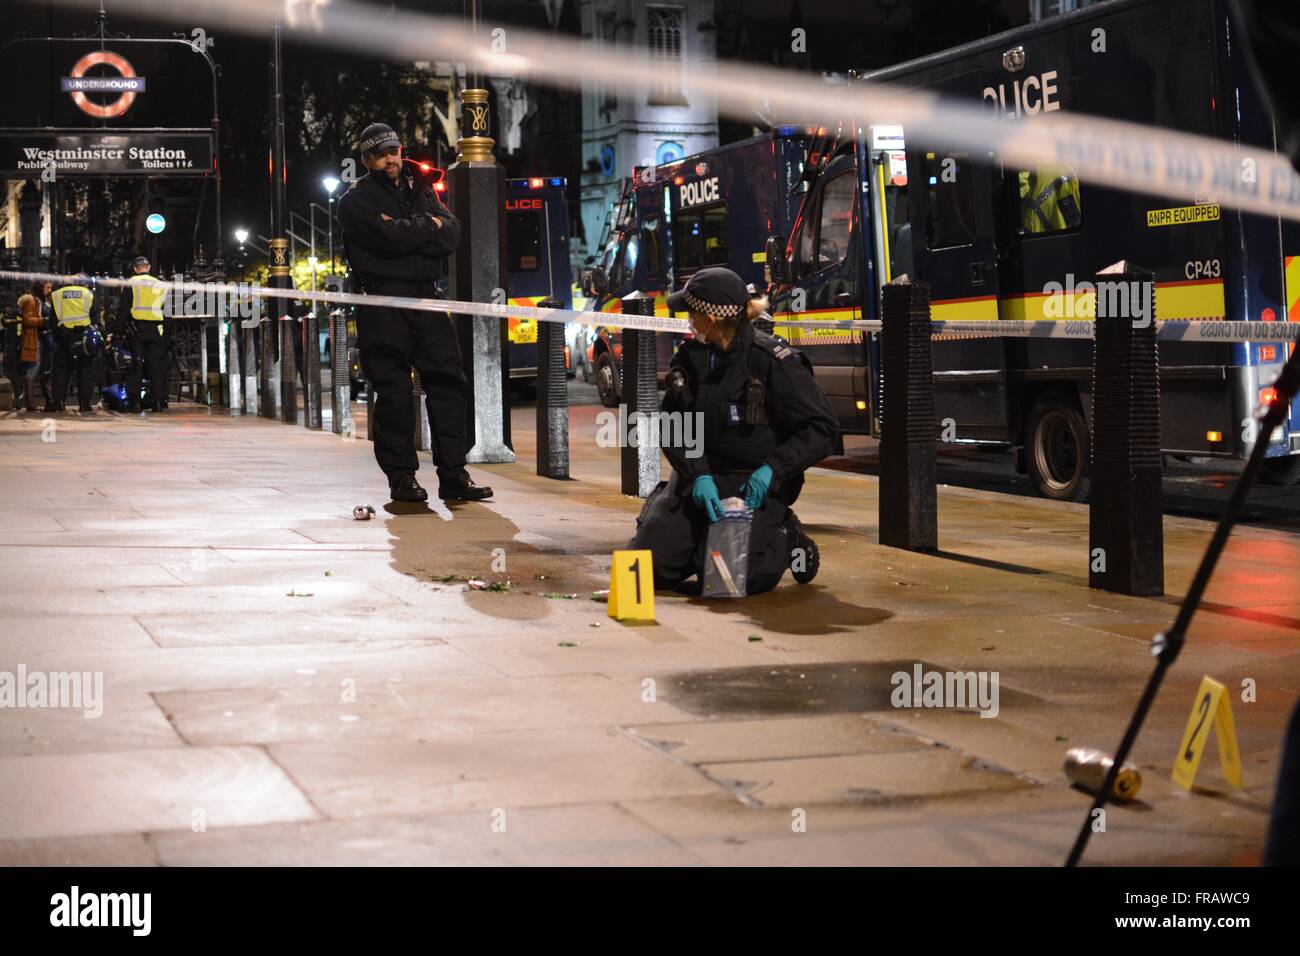 November 5th 2015. London, UK. Police officer gathers evidence from a broken beer bottle after clashes between police aqnd protesters. ©Marc Ward/Alamy Stock Photo